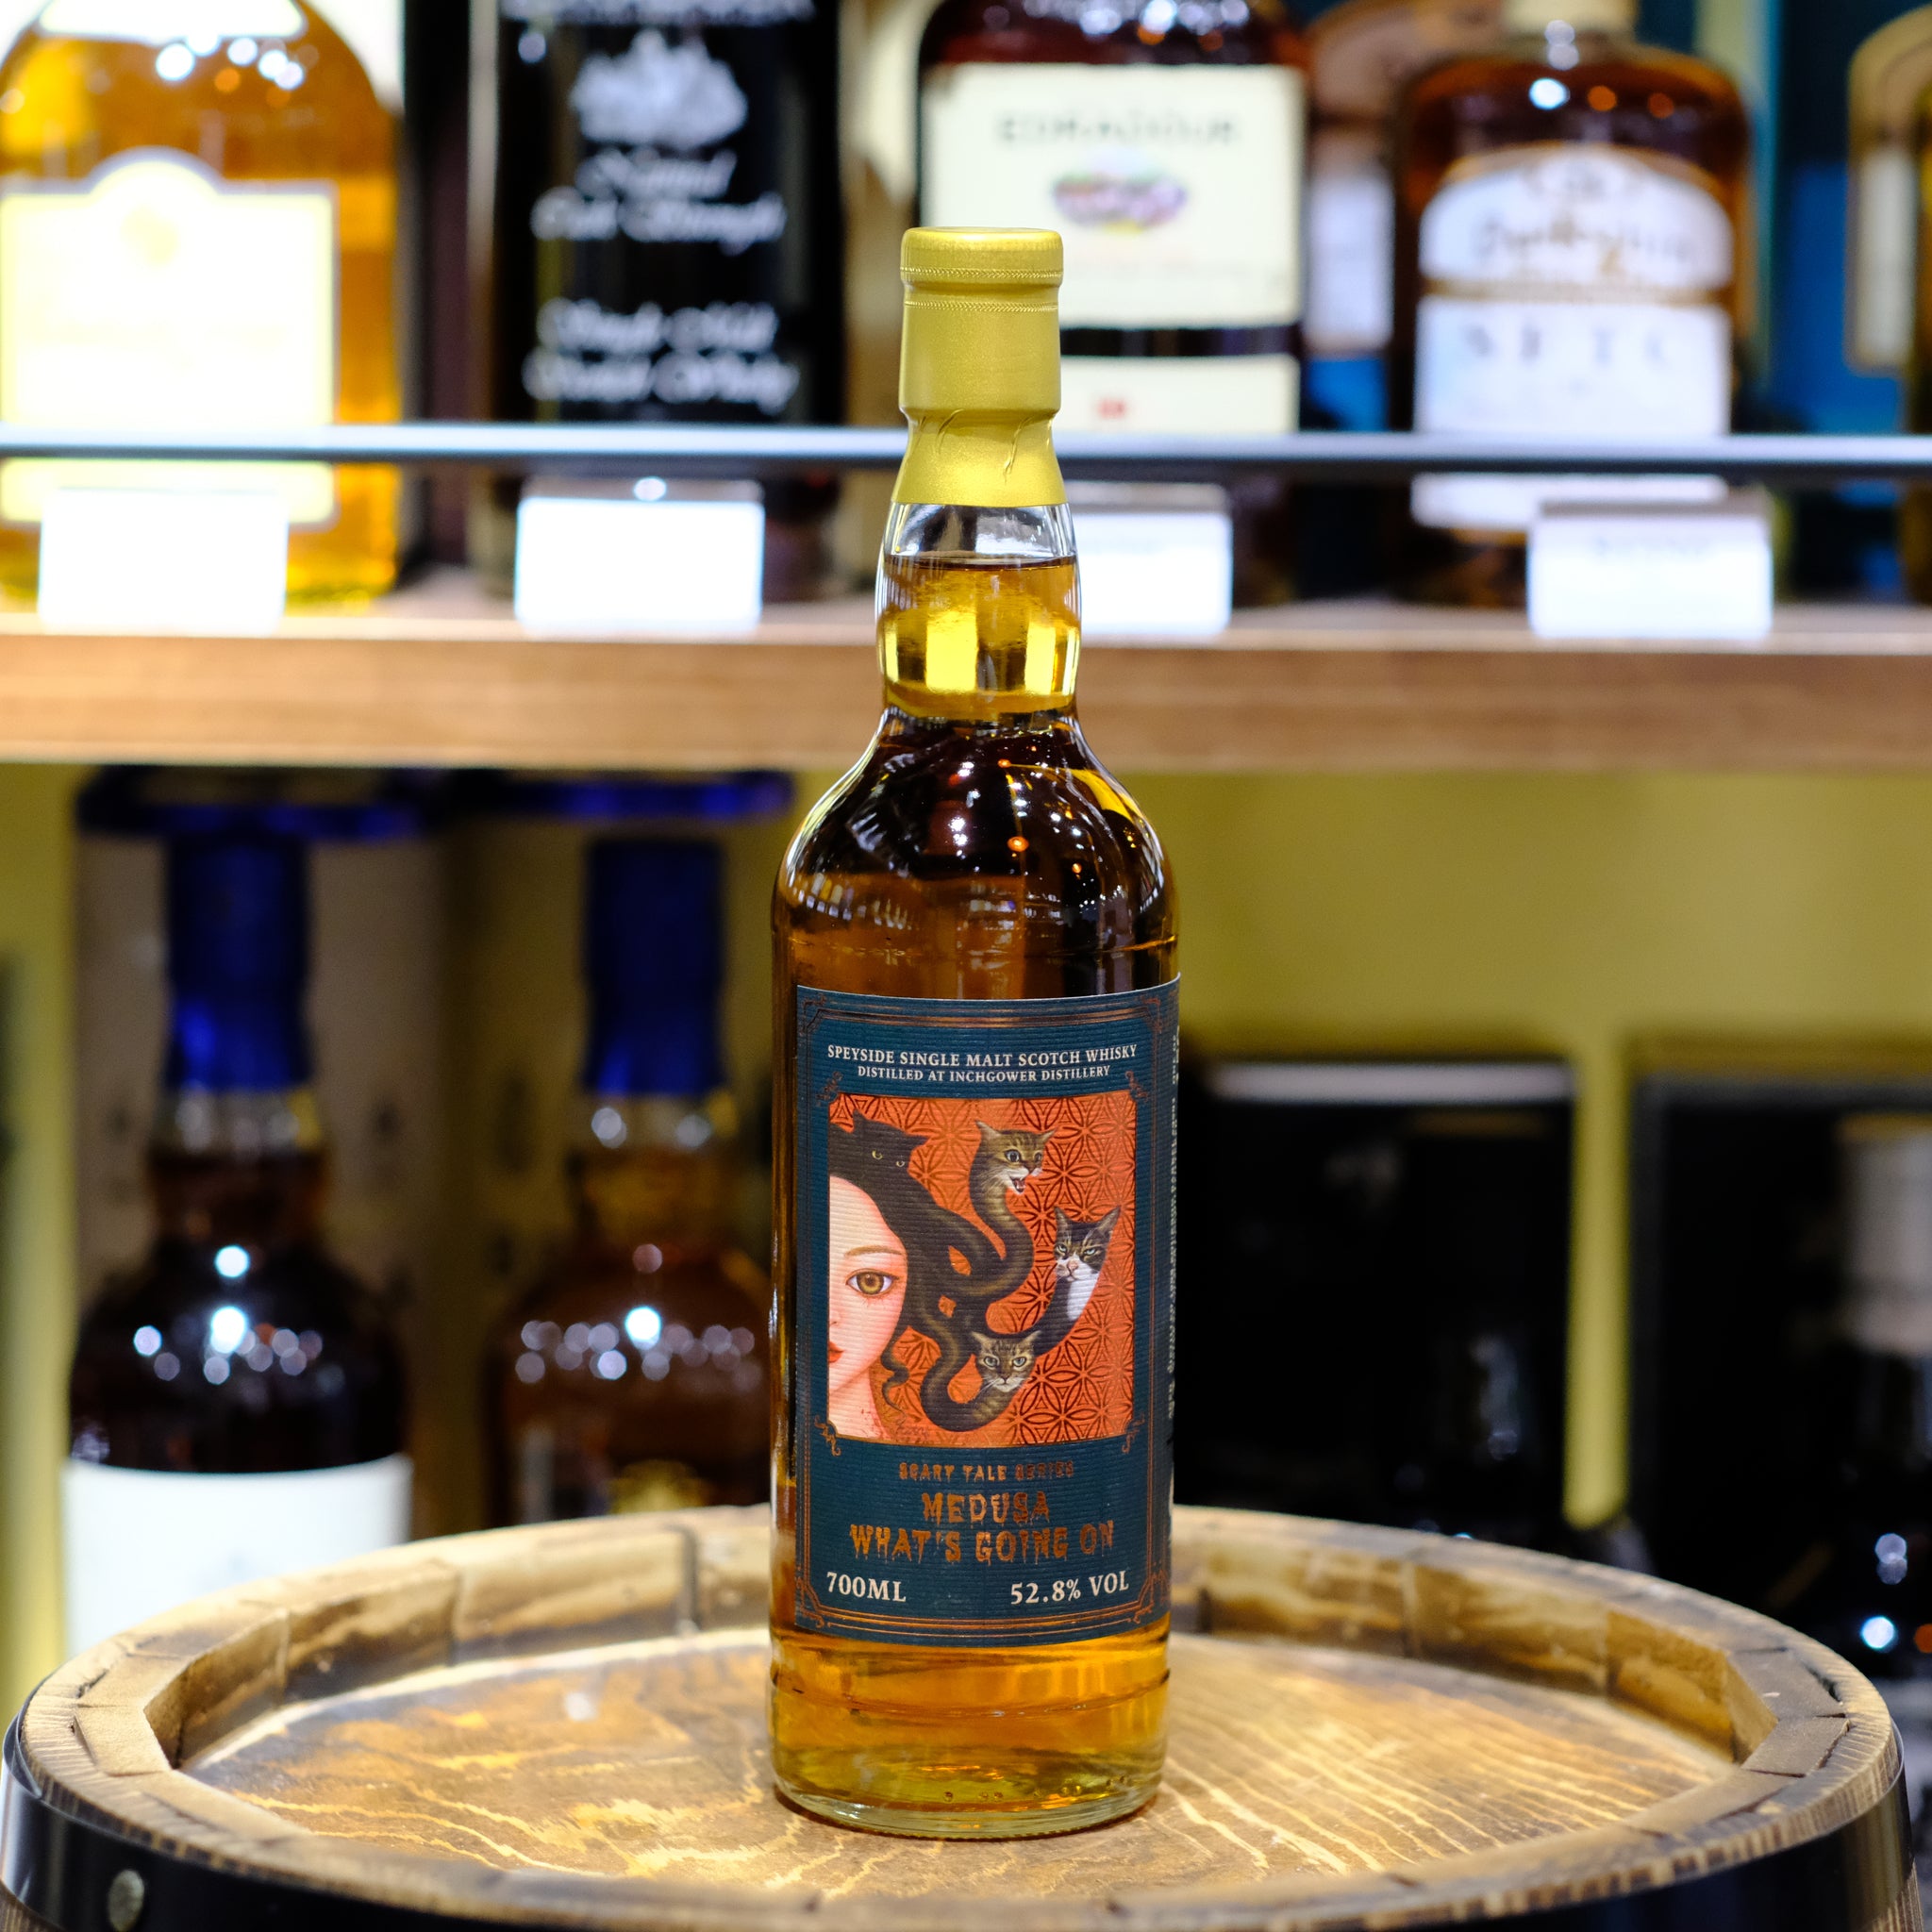 Scary Tale Series No.2 - Medusa: What's Going On Single Malt Scotch Whisky